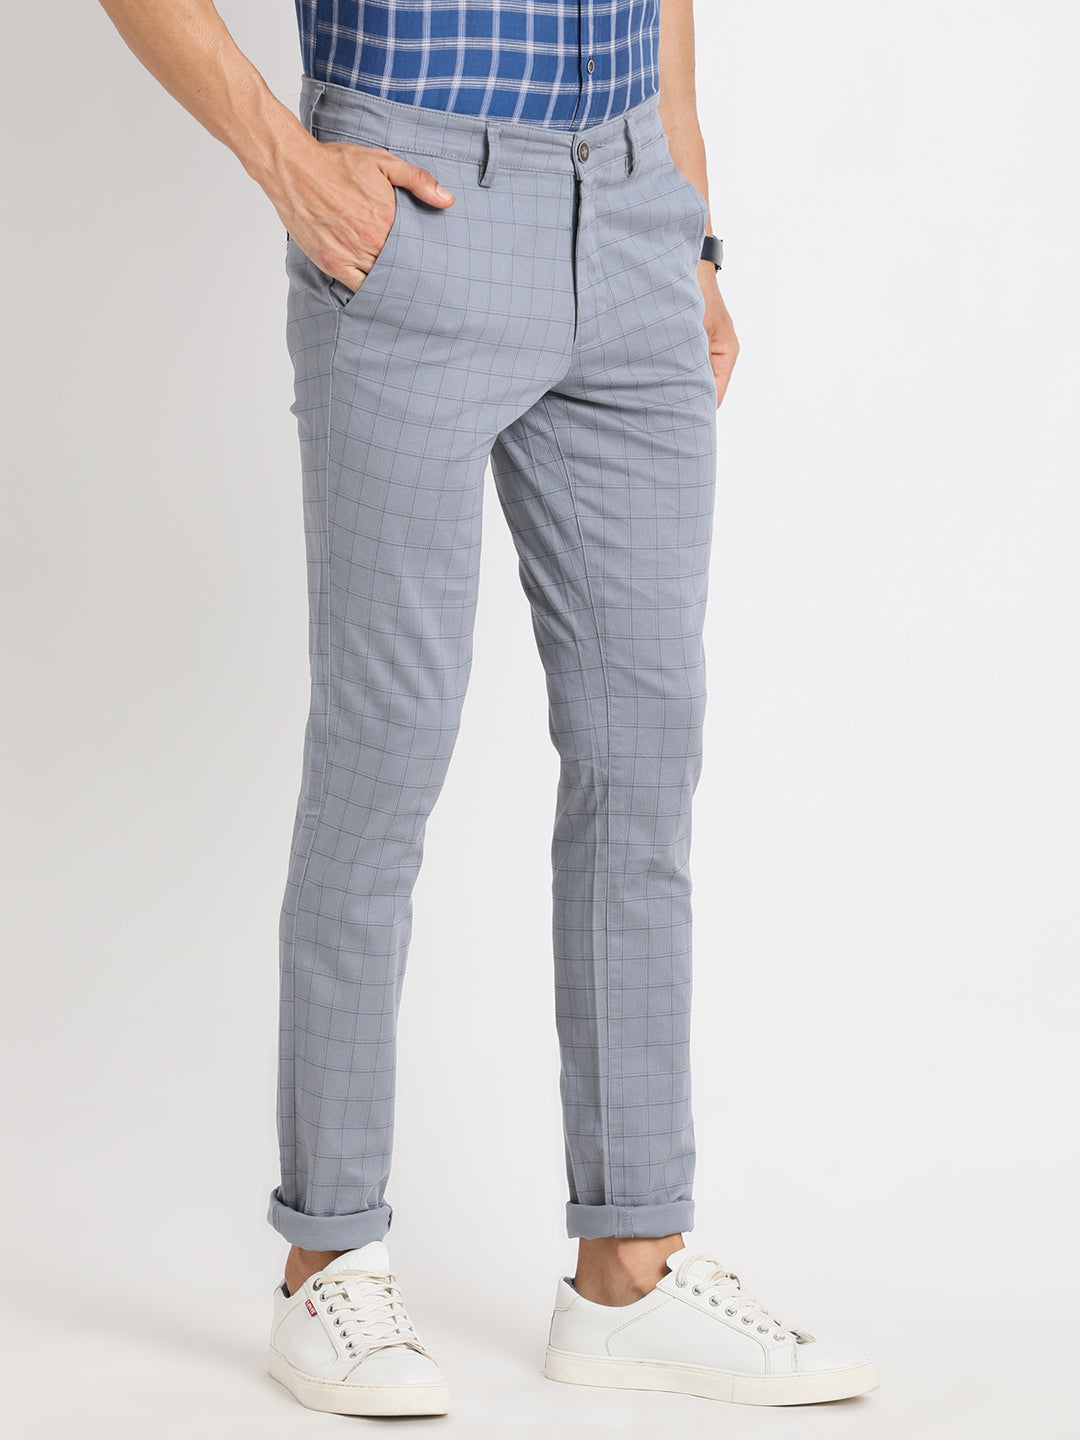 Cotton Stretch Grey Checkered Narrow Fit Flat Front Casual Trouser